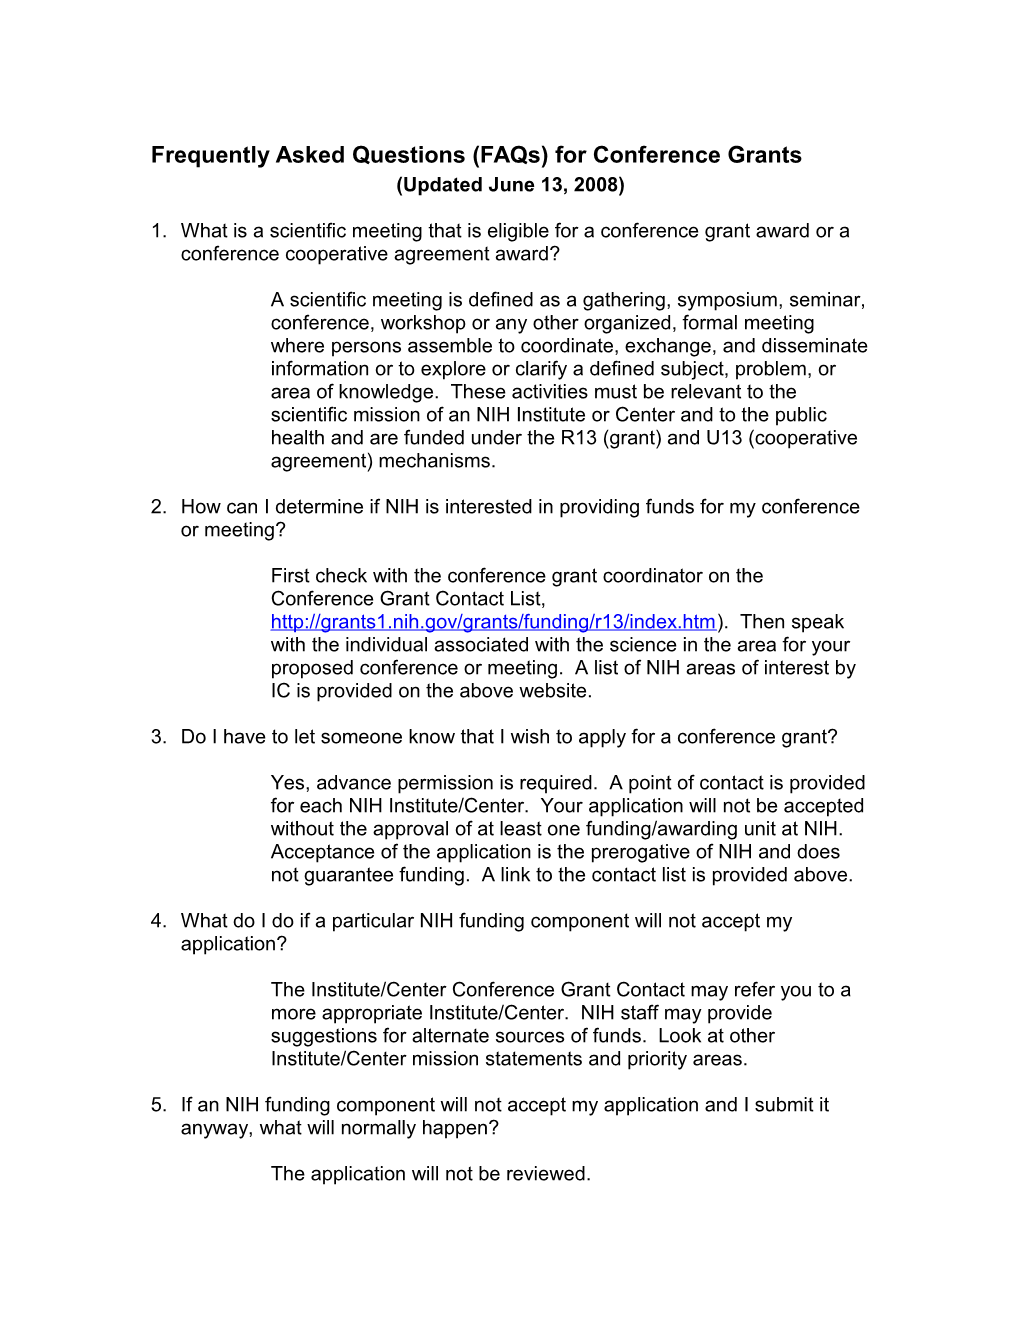 Frequently Asked Questions (Faqs) for Conference Grants (R13/U13) - 06/13/2008